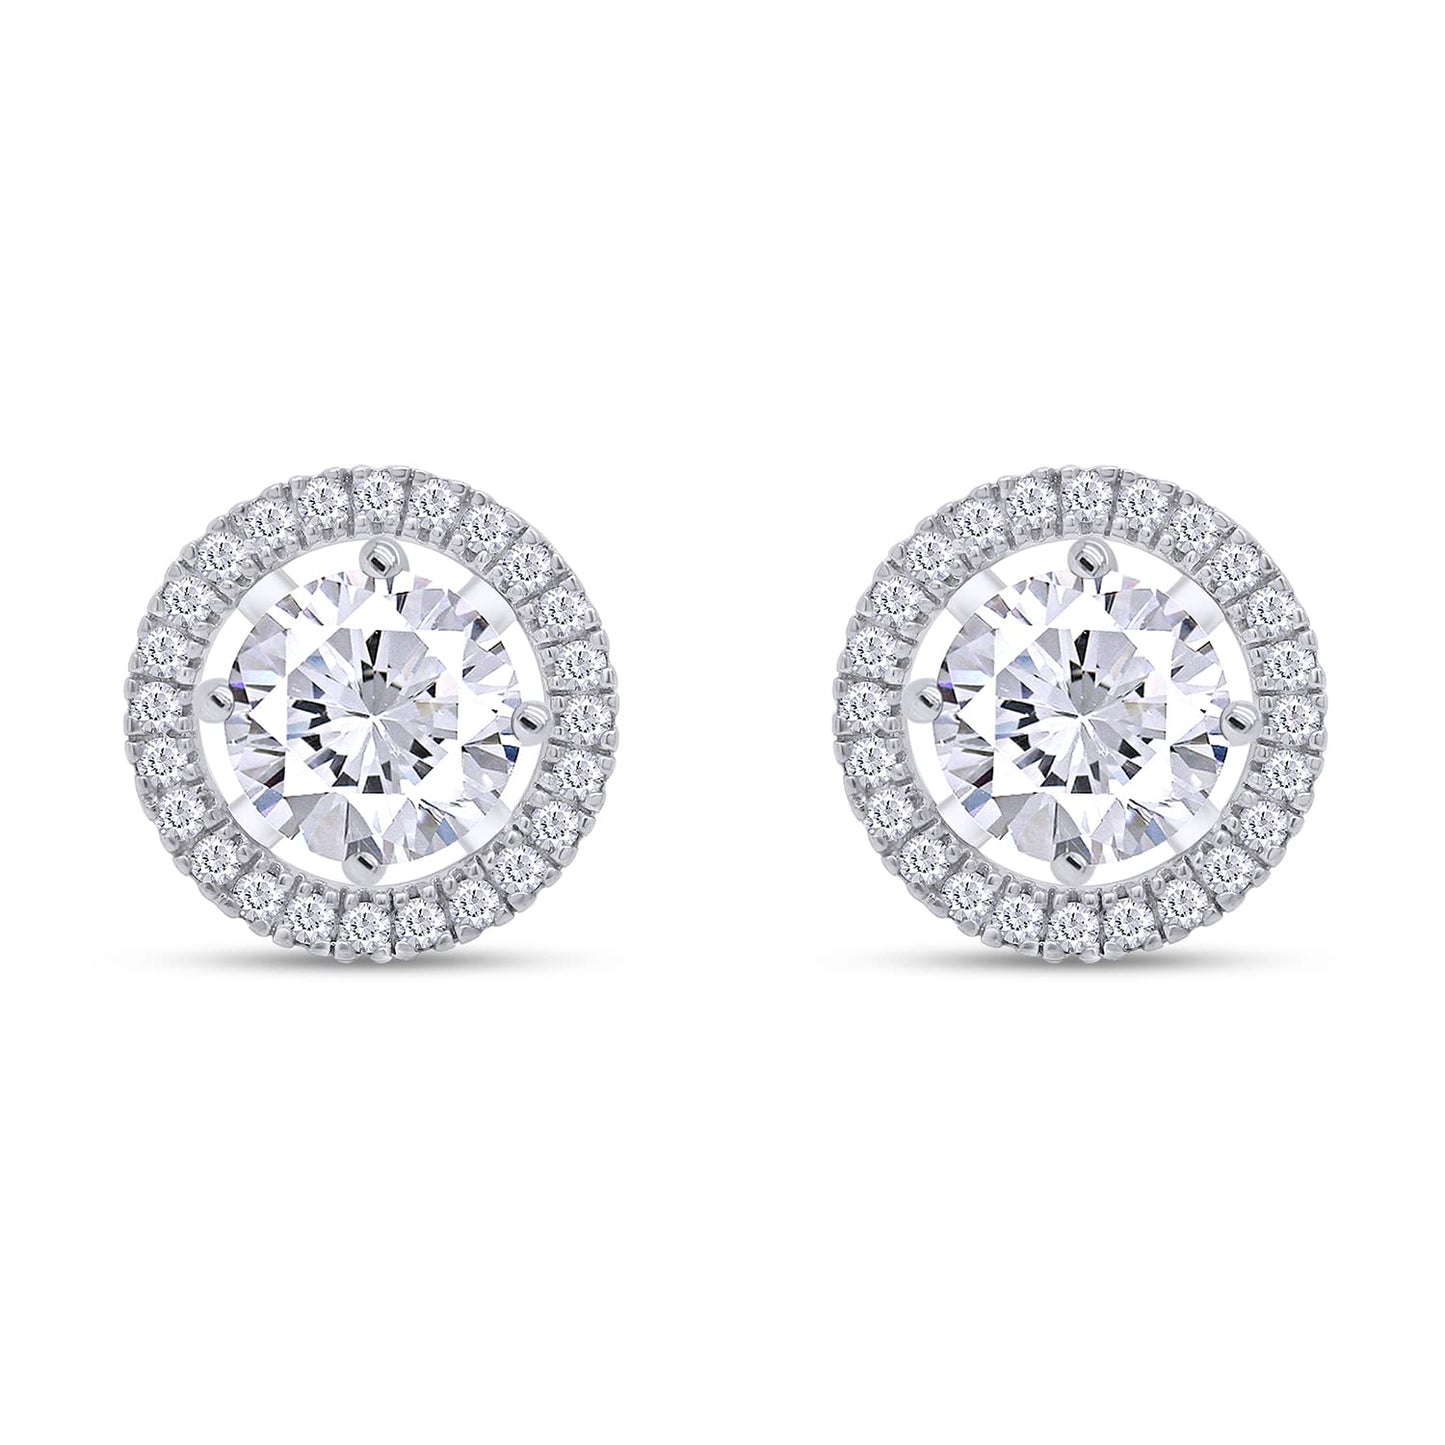 2 Carat Center Stone 6.5MM Round Cut Lab Created Moissanite Diamond Push Back Stud Earrings In 925 Sterling Silver (2 Cttw)